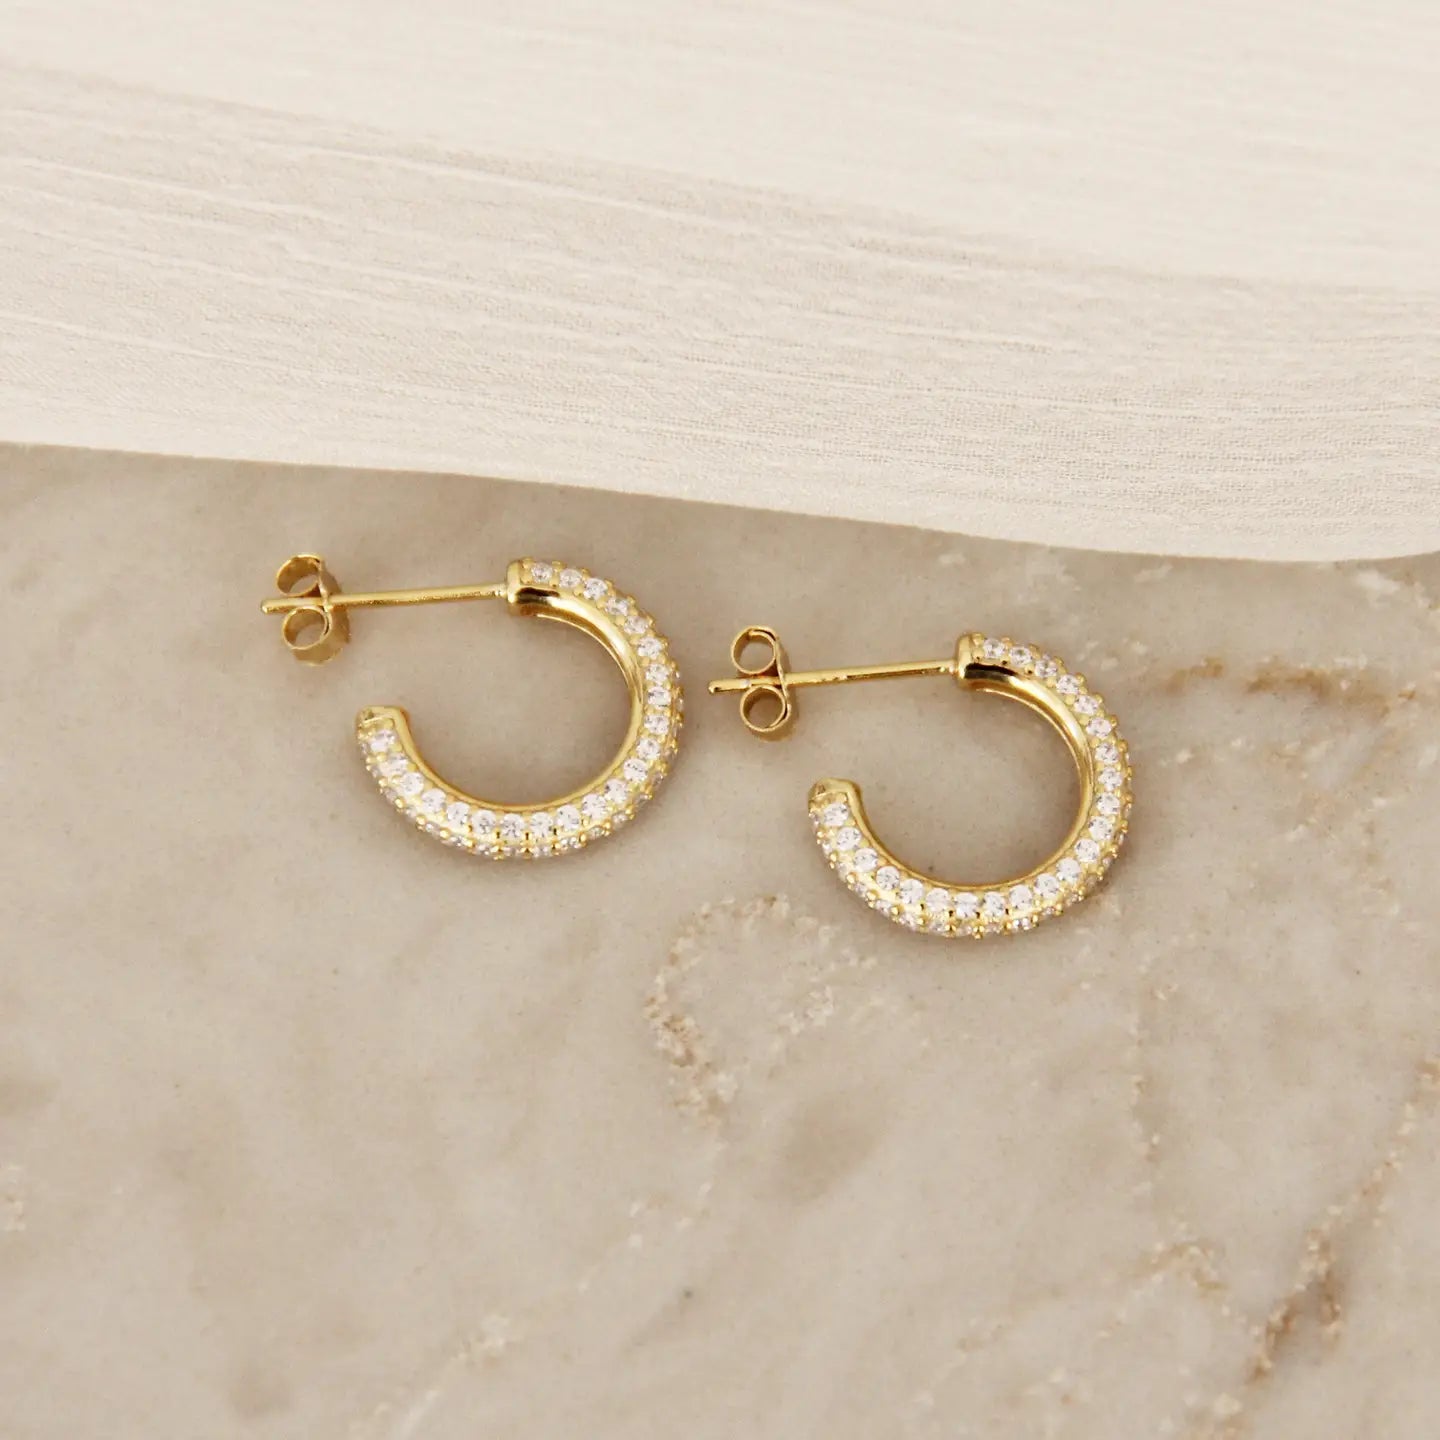 Lucia Jeweled Semi Hoops by Maive